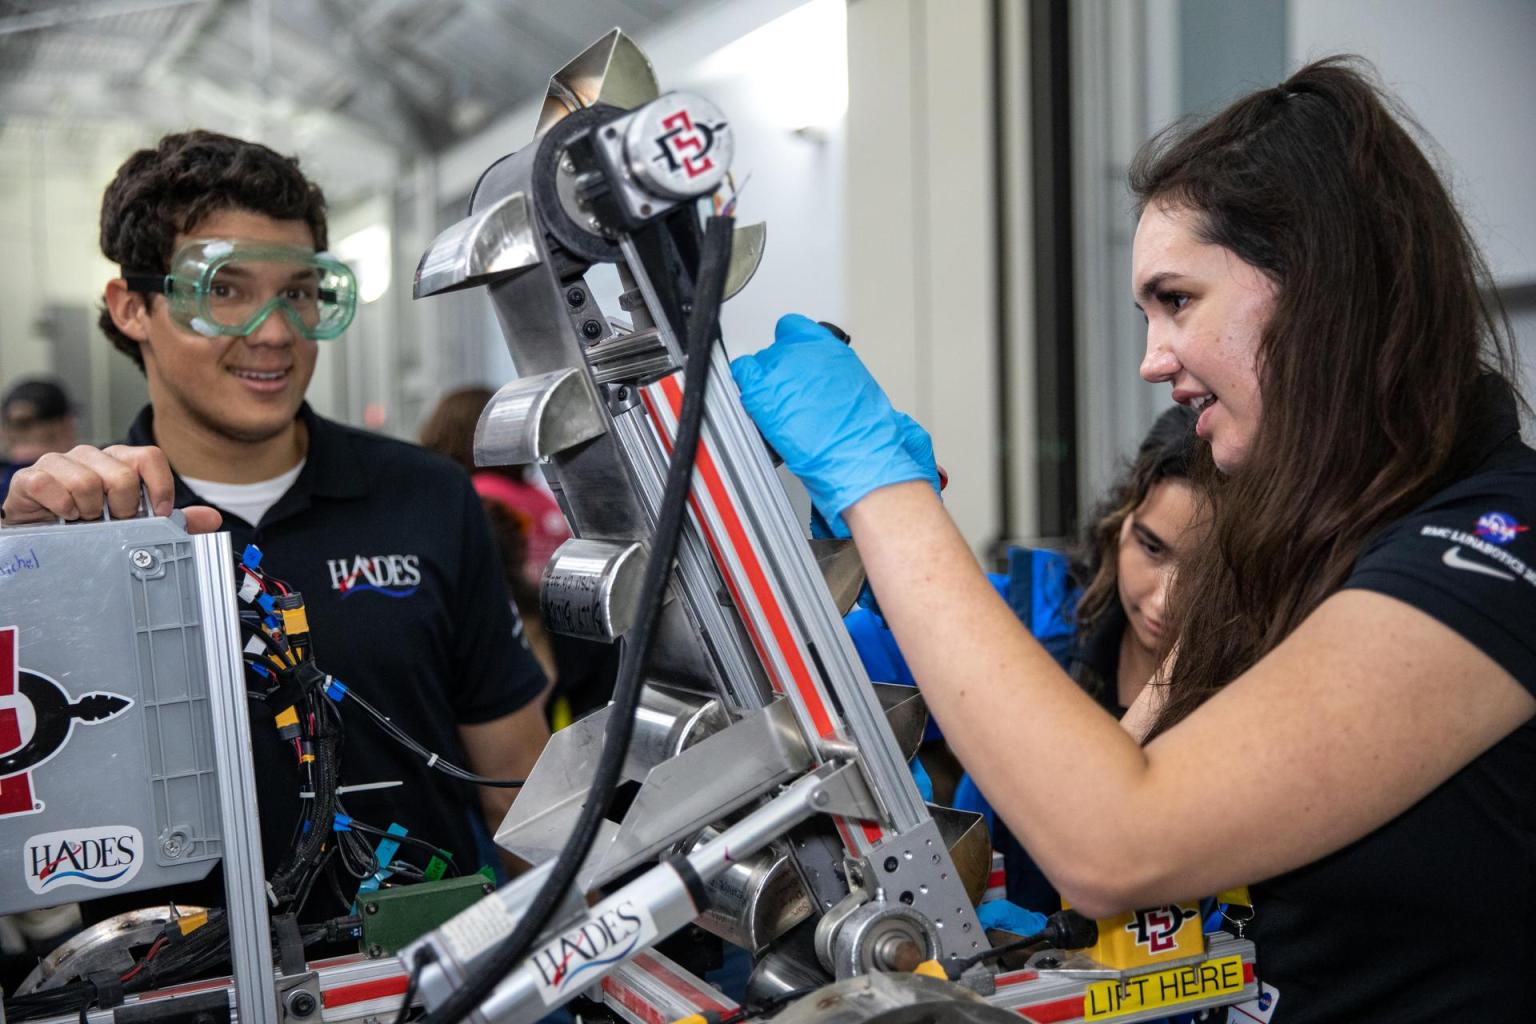 Students from San Diego State College prepare their robotic miner for its second turn to dig in the mining arena during NASA’s Lunabotics competition.